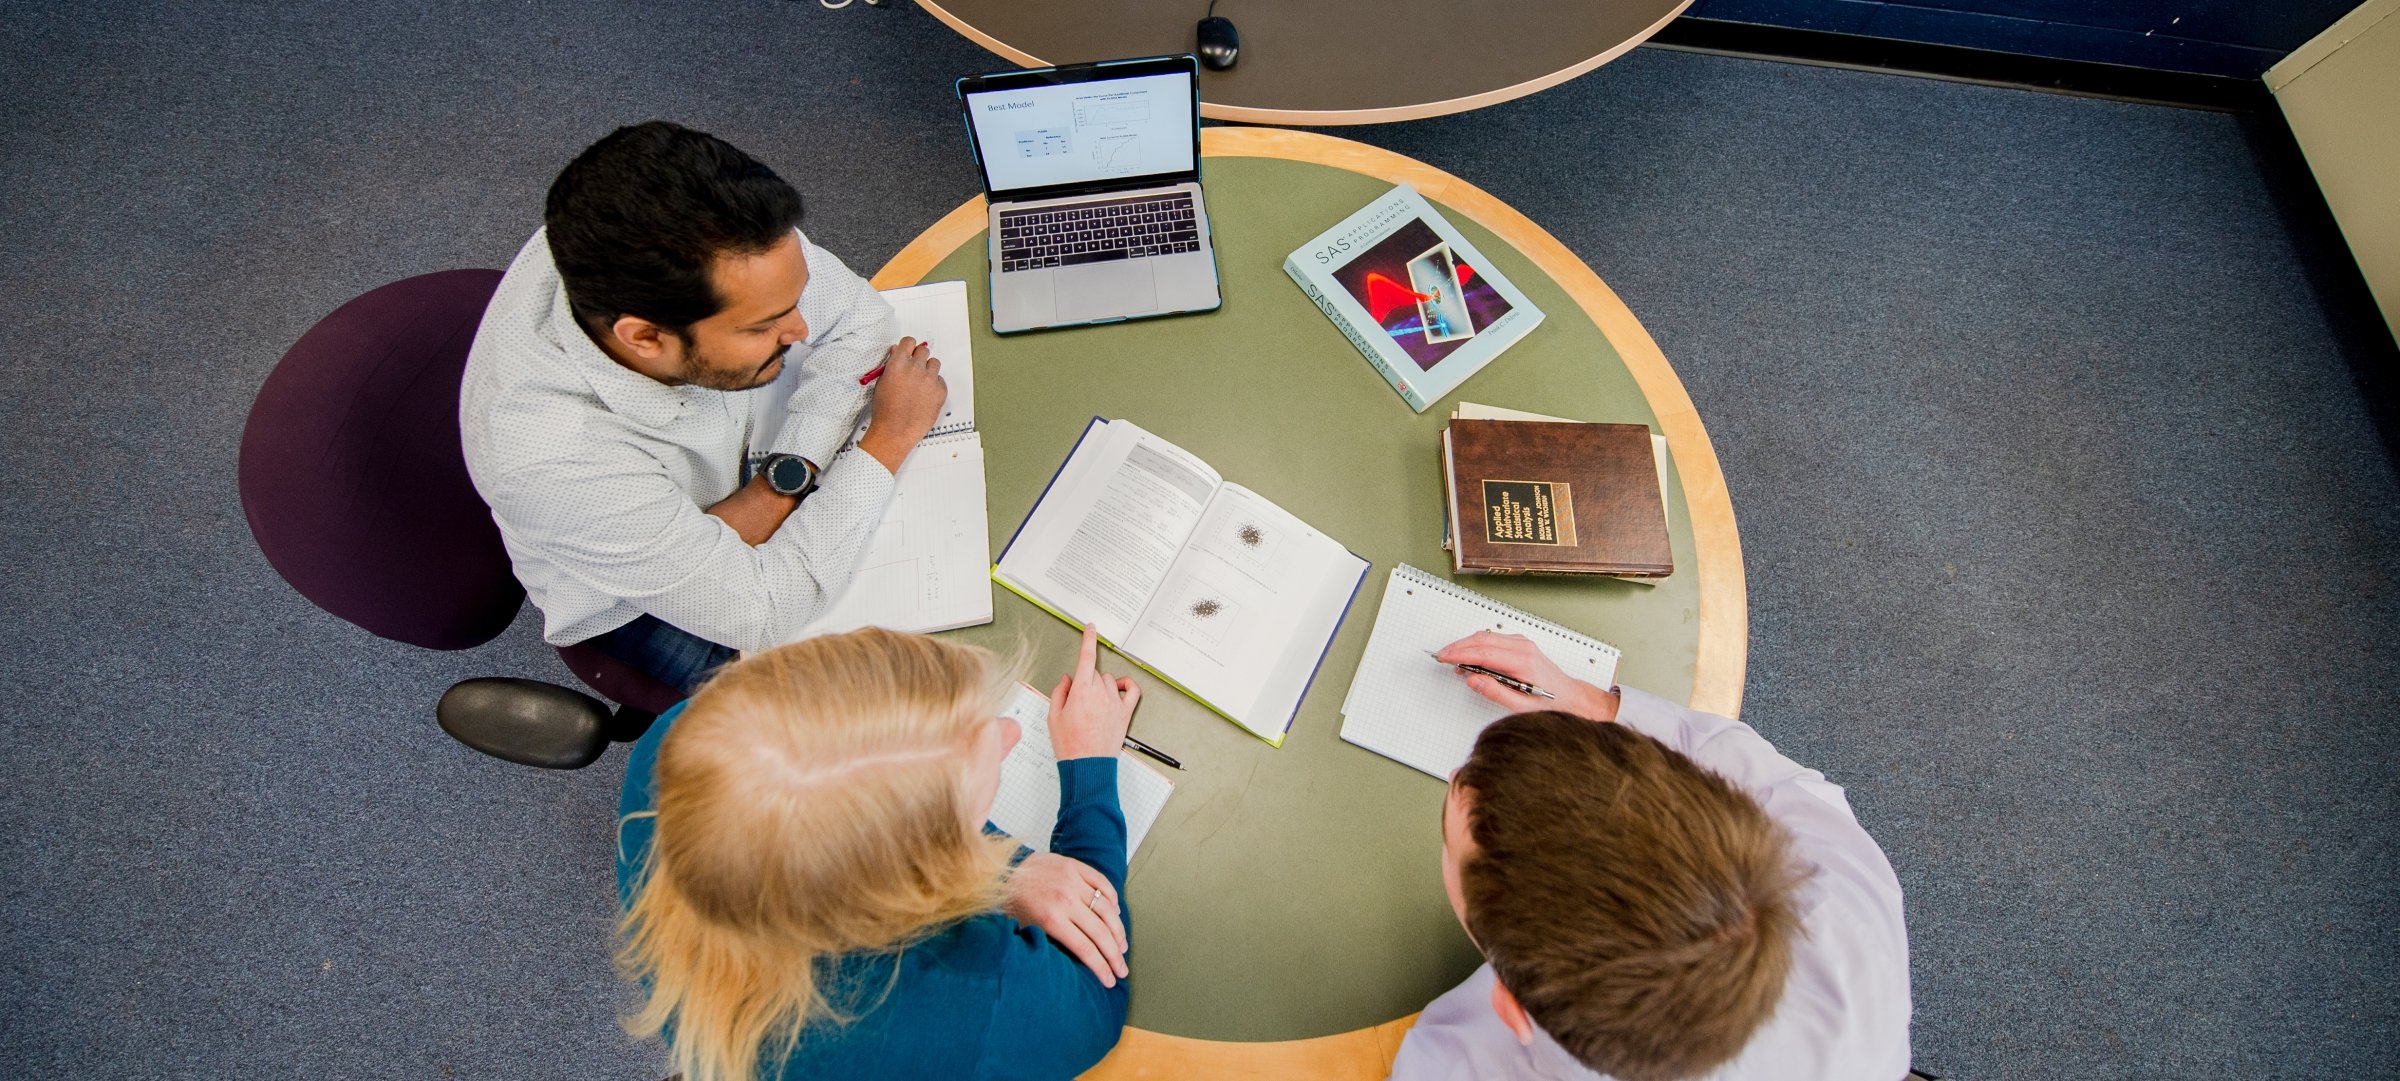 Three people looking at textbook and laptop together at a table, aerial view